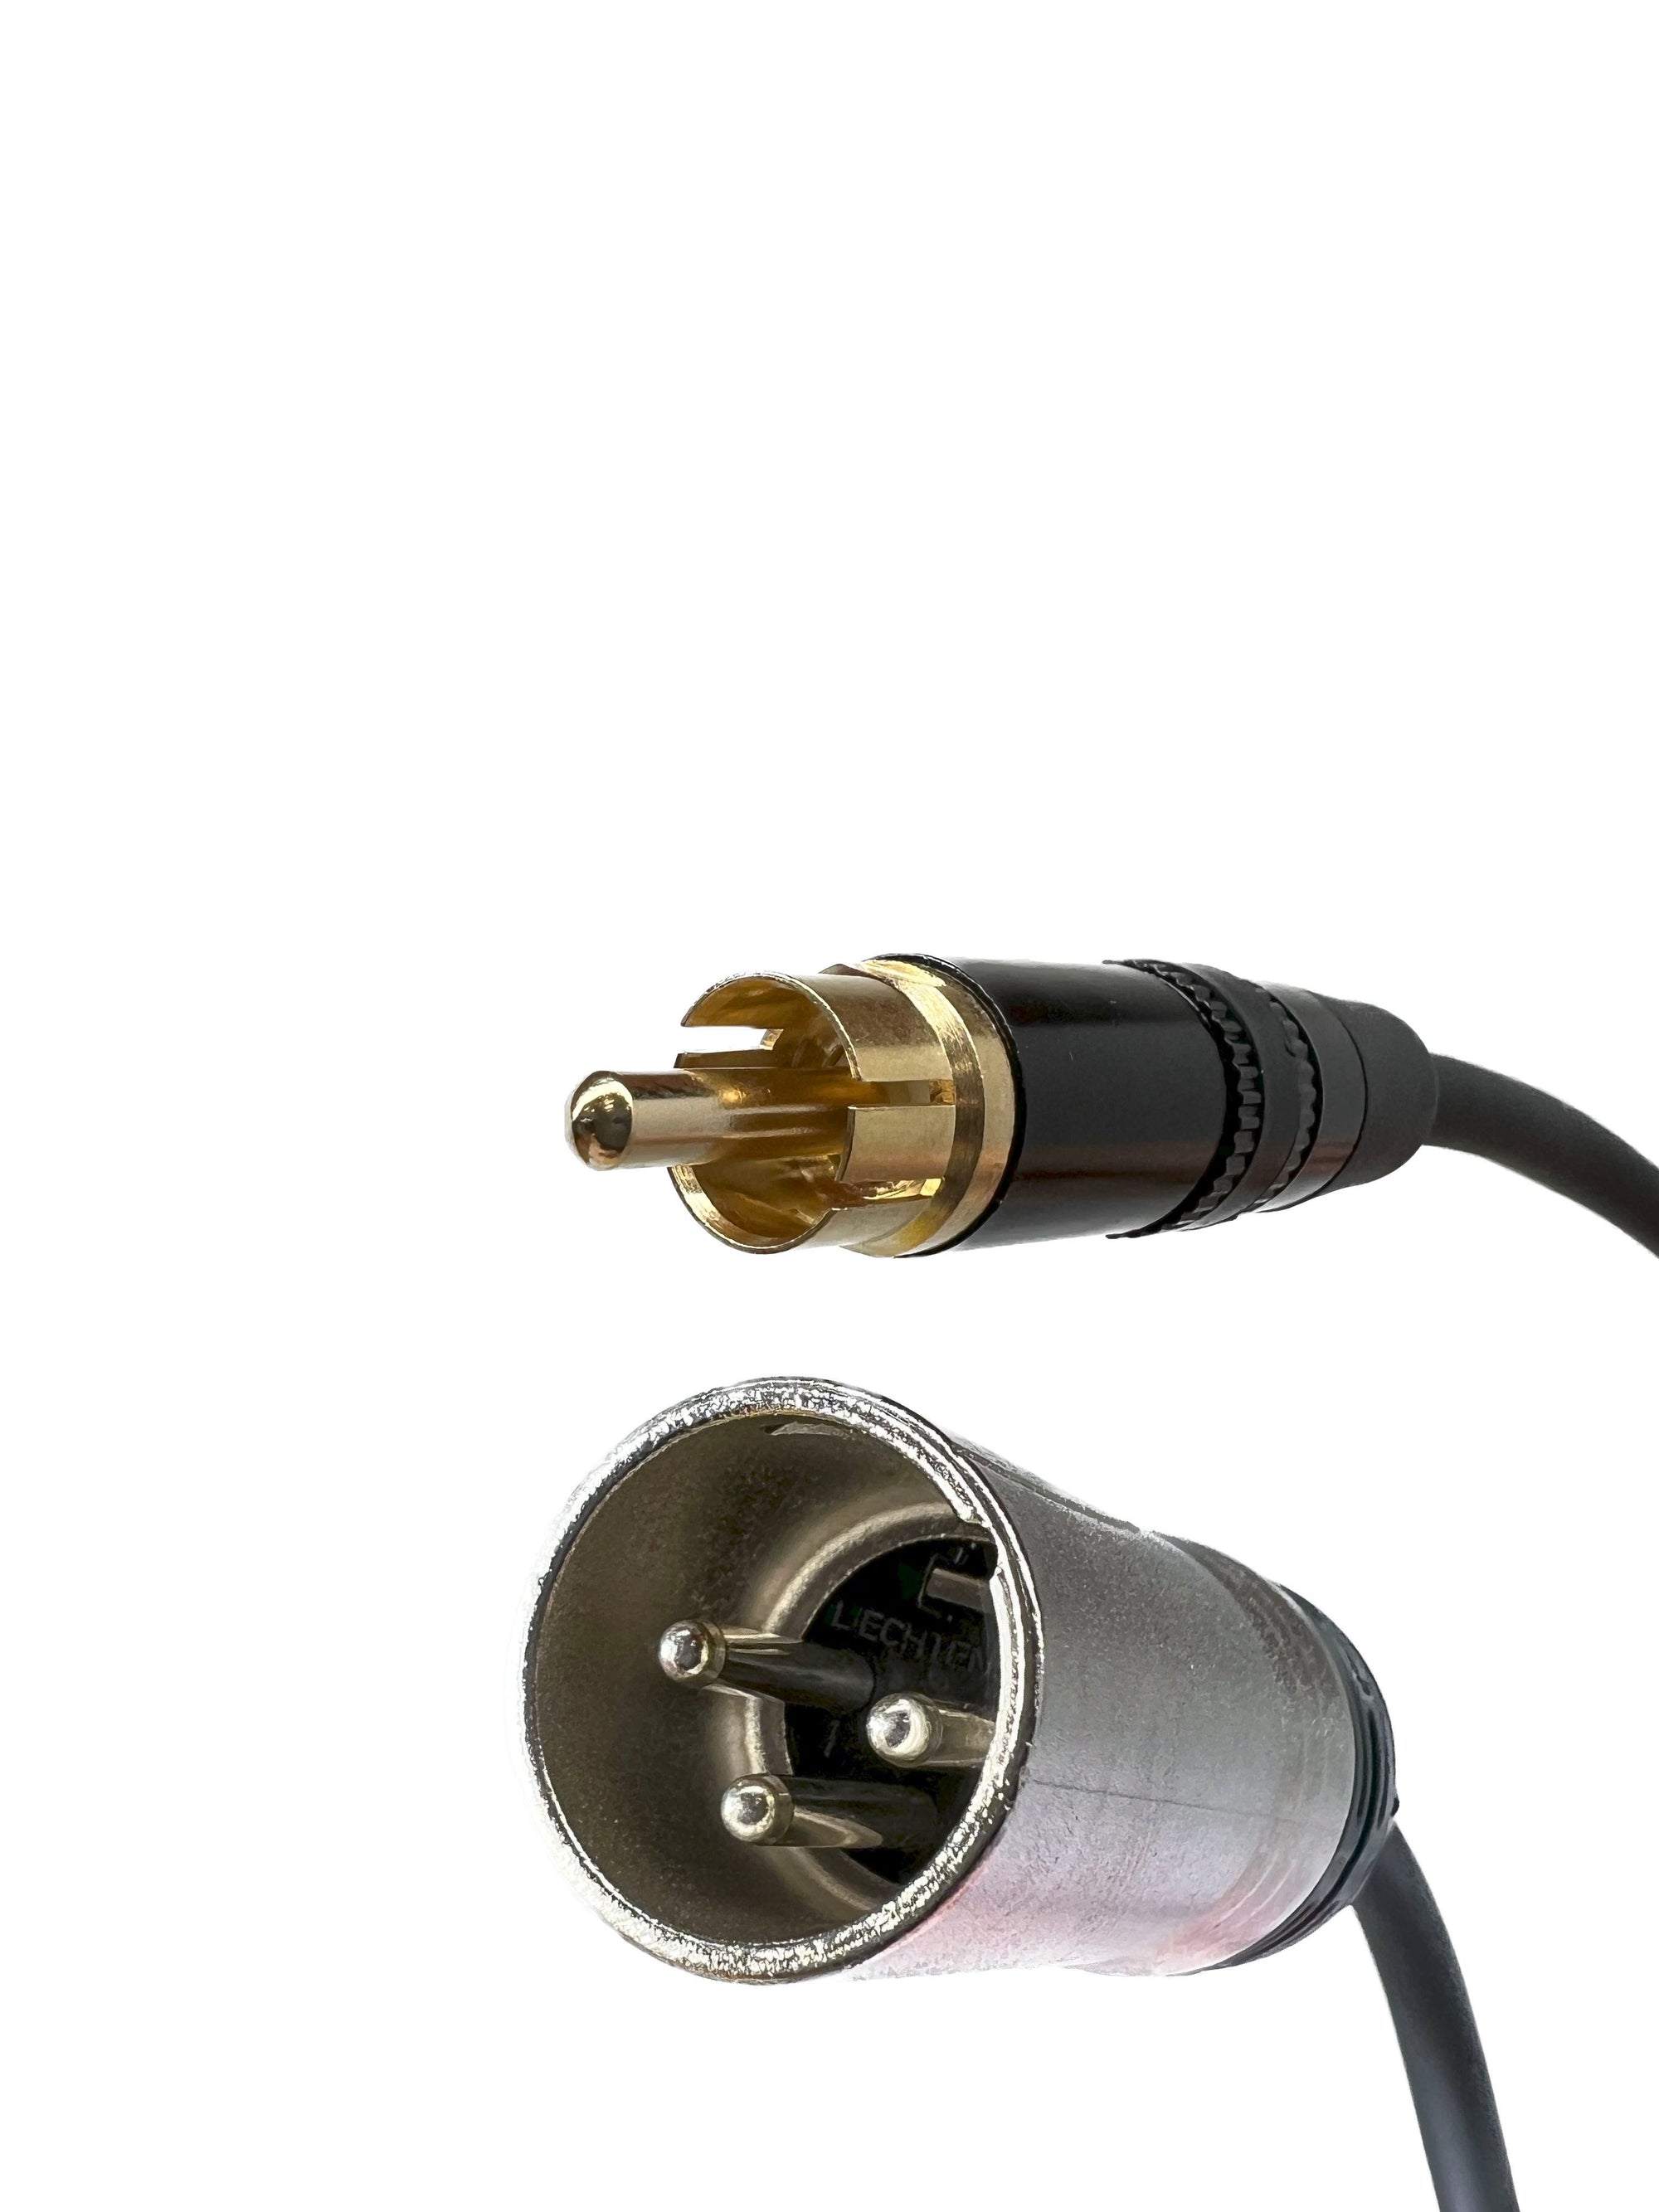 50ft Pro-Audio Cable XLR Male to RCA Male